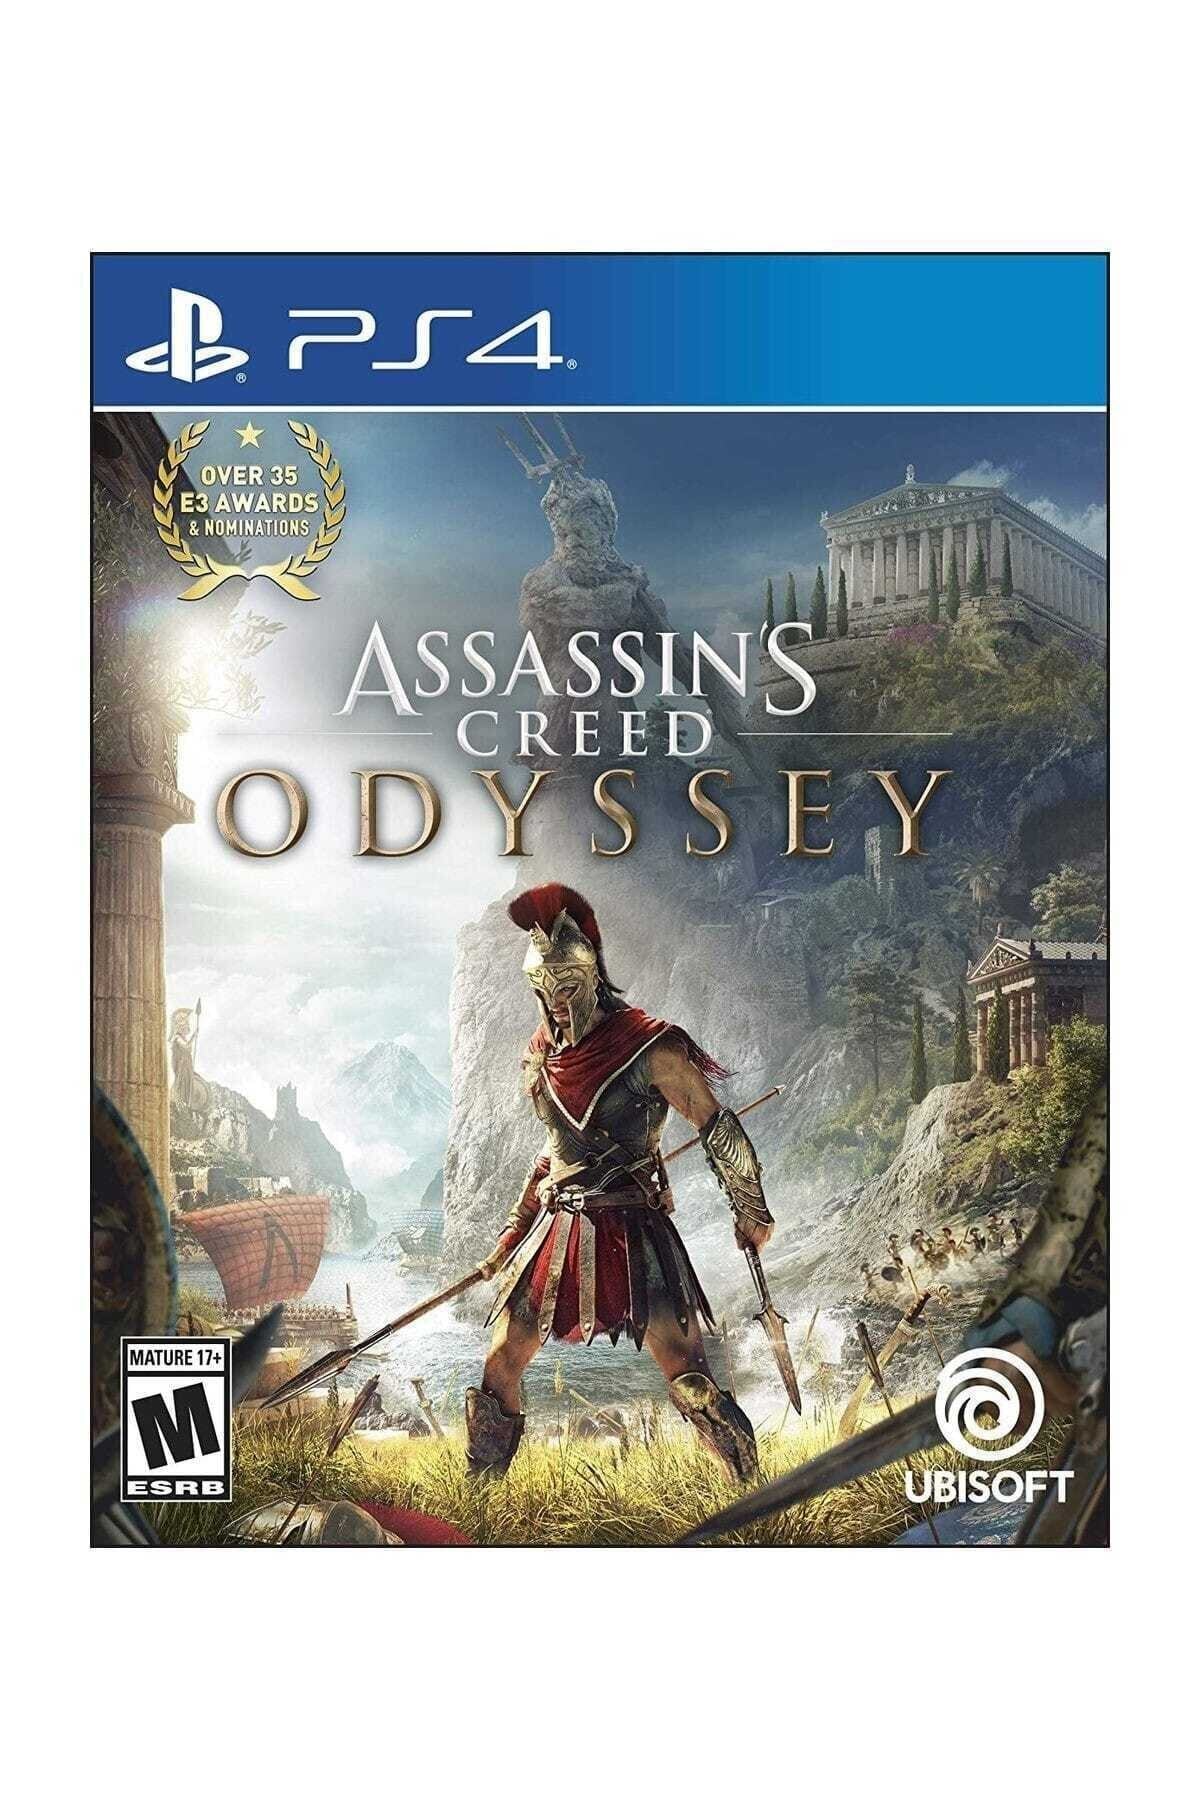 Ps4 Assassin's Creed Odyssey